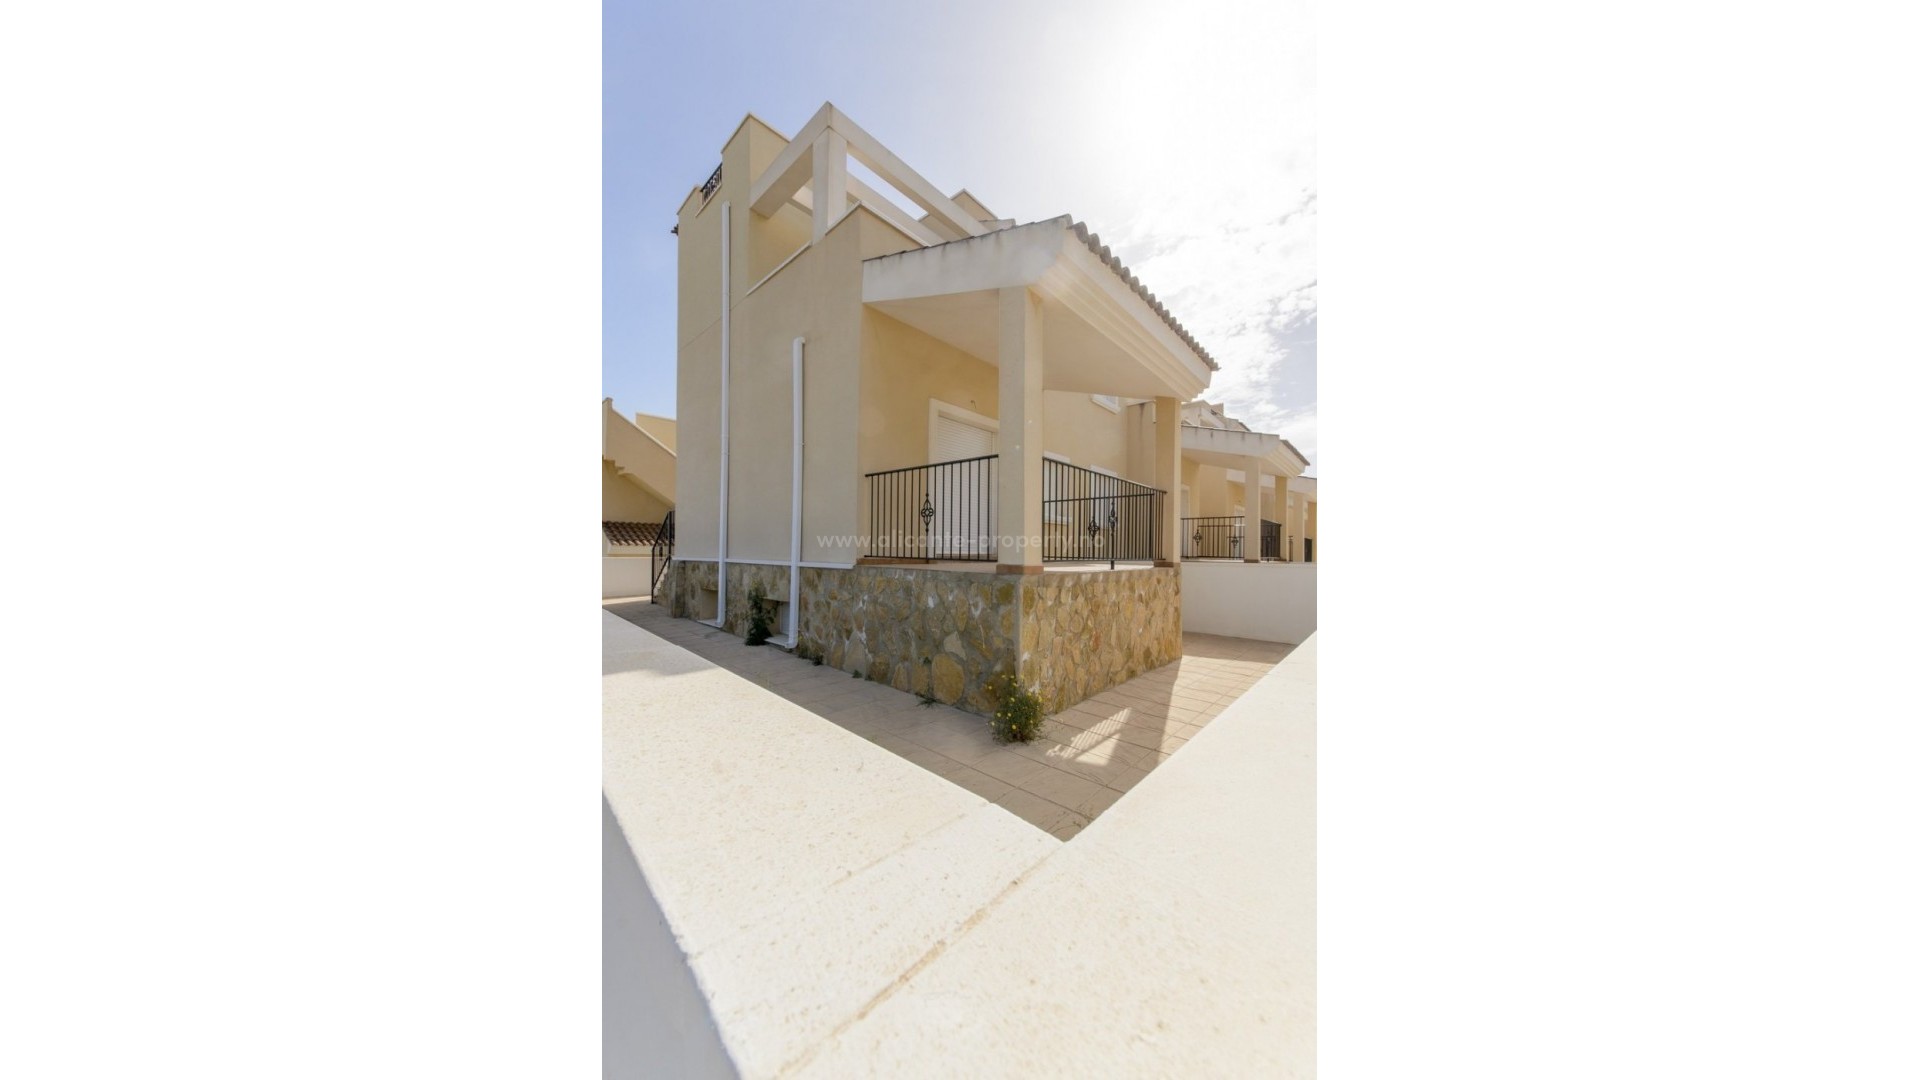 Turnkey villa/townhouse Cerro del Sol 6 km near Torrevieja, 3 bedrooms, 2 bathrooms, large gardens, private sun terraces and parking on the plots, communal pool